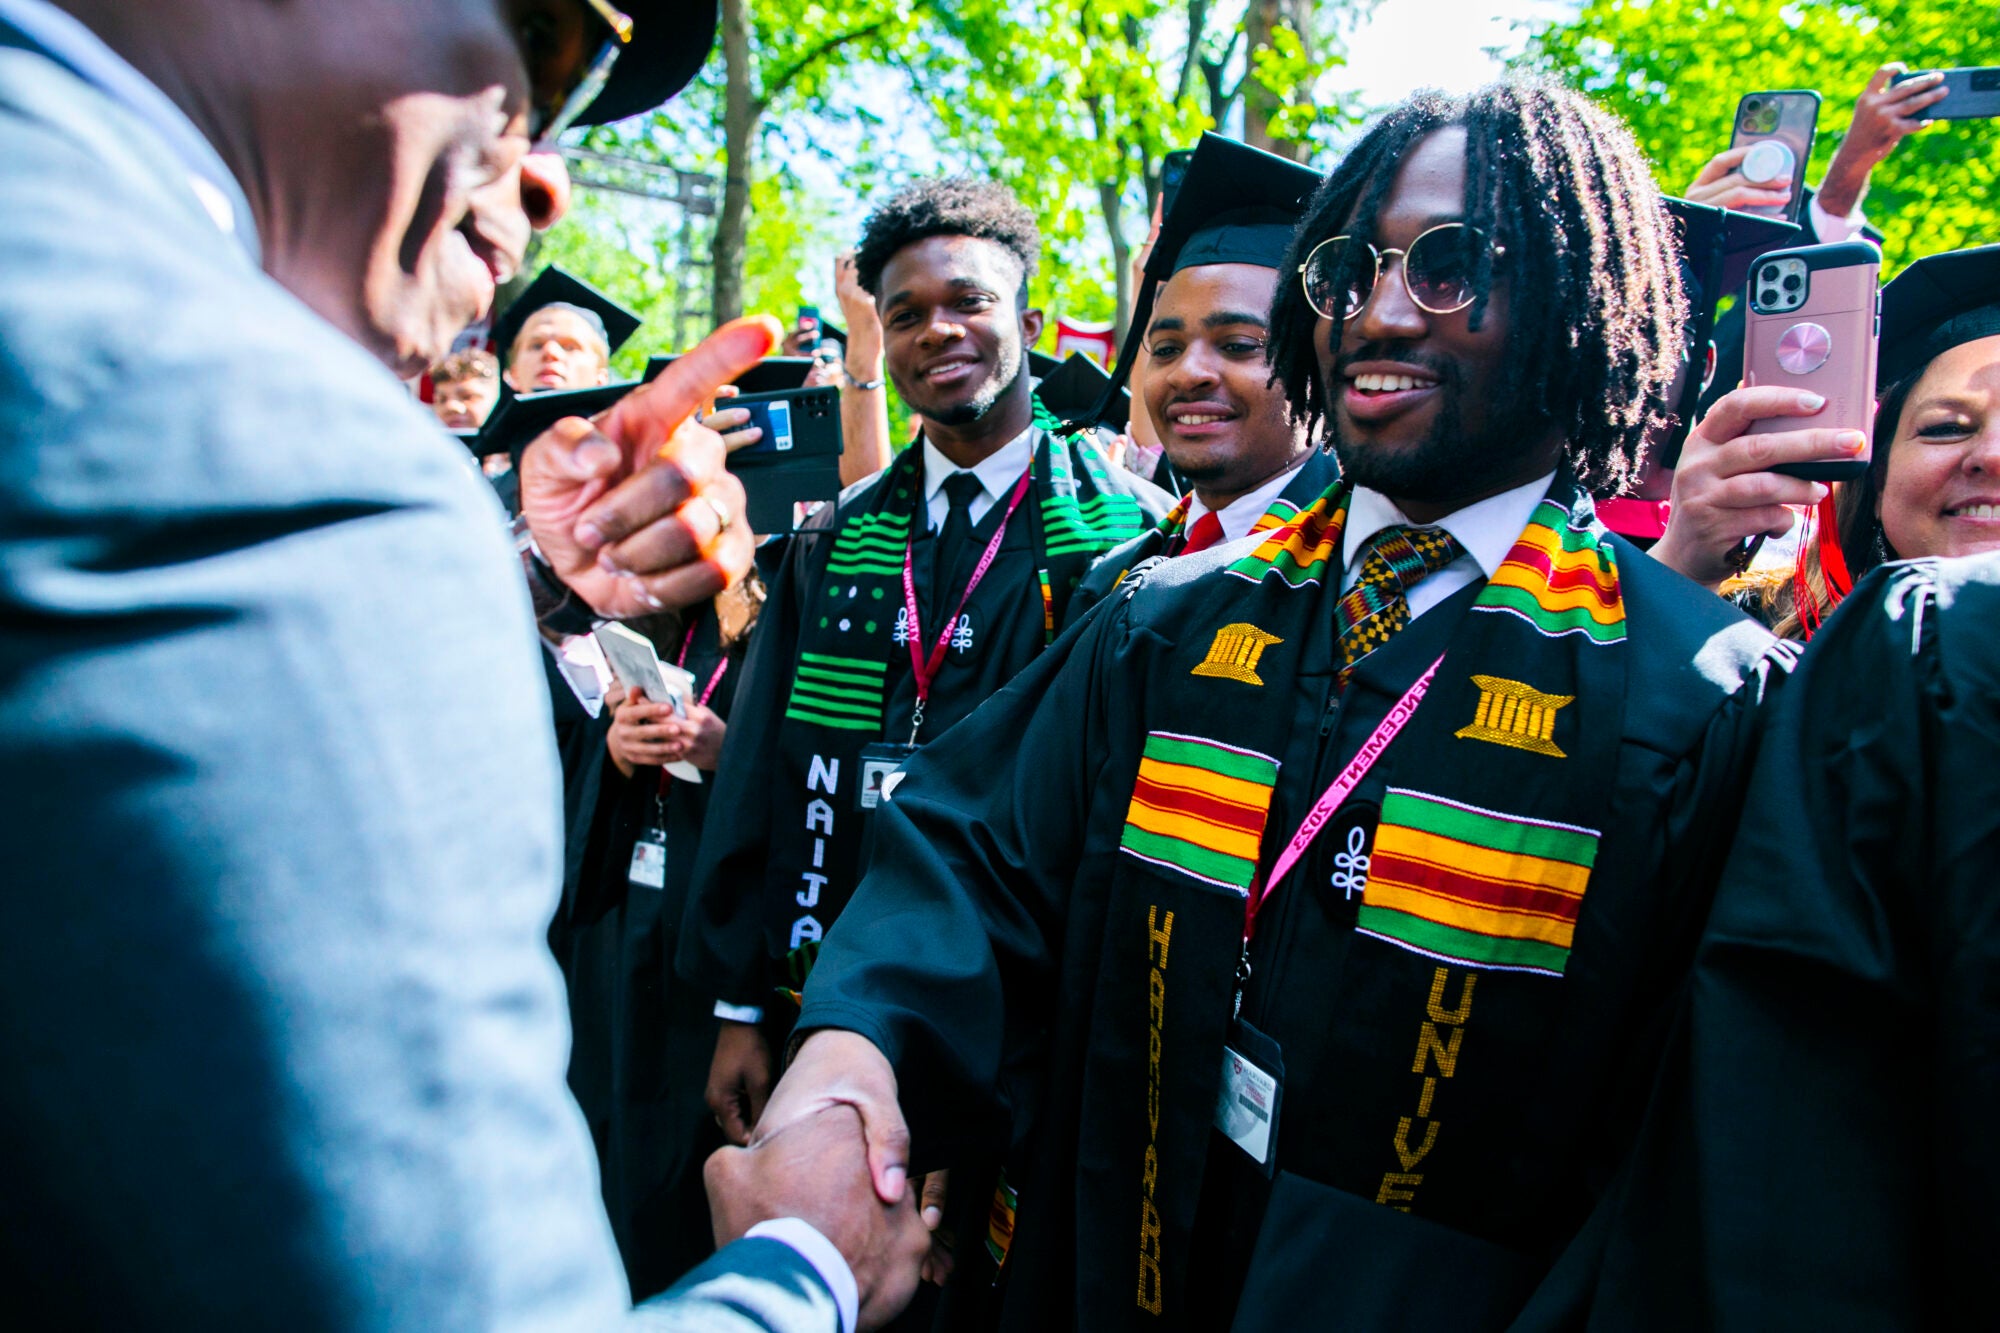 Graduates shaking hands with a man